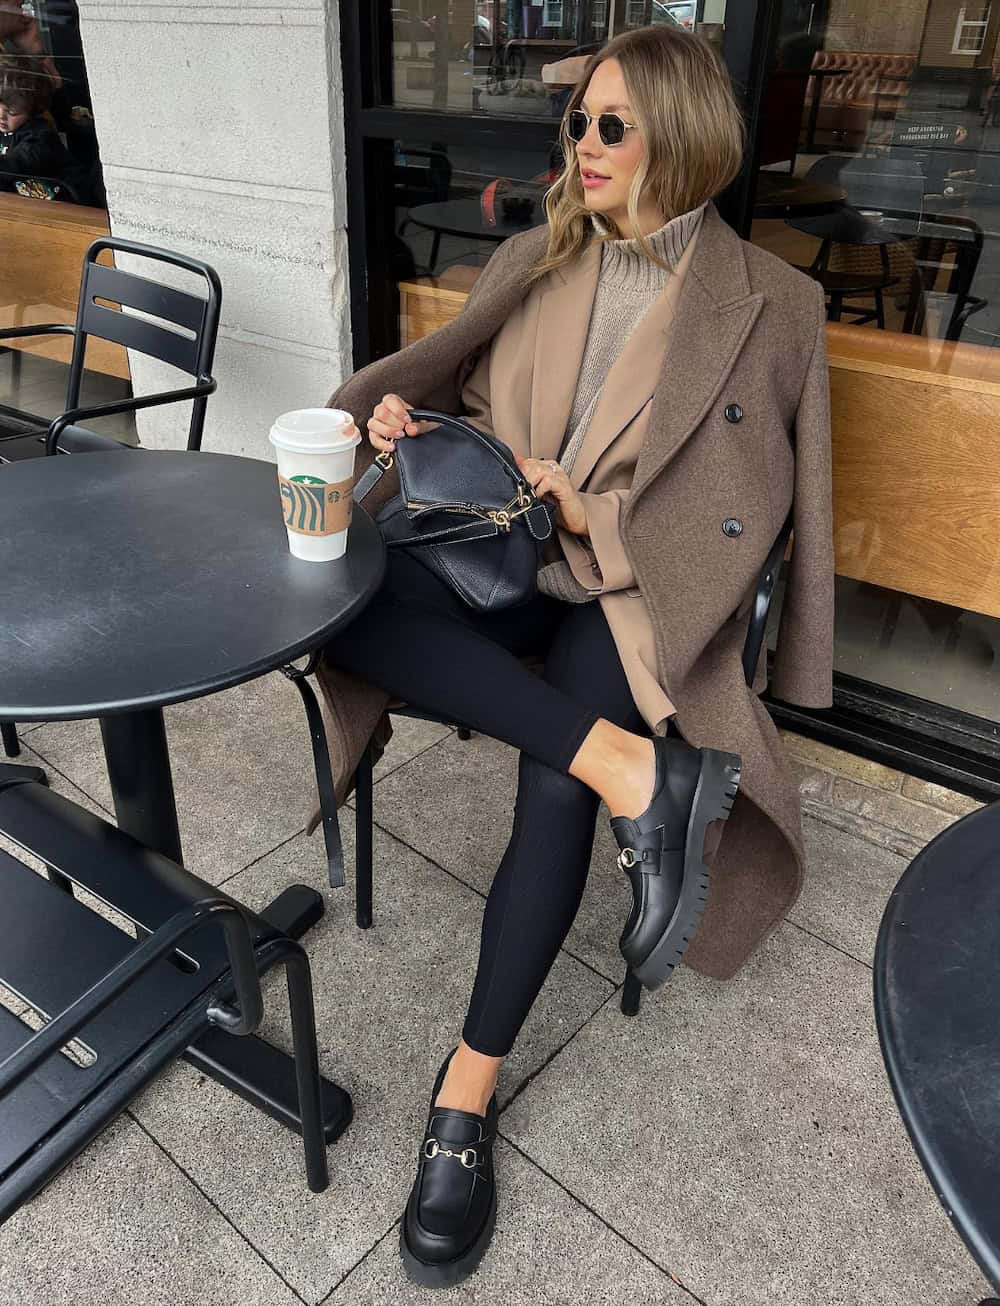 woman wearing an expensive-looking fall outfit with a long coat, turtleneck, black leggings, and black loafers